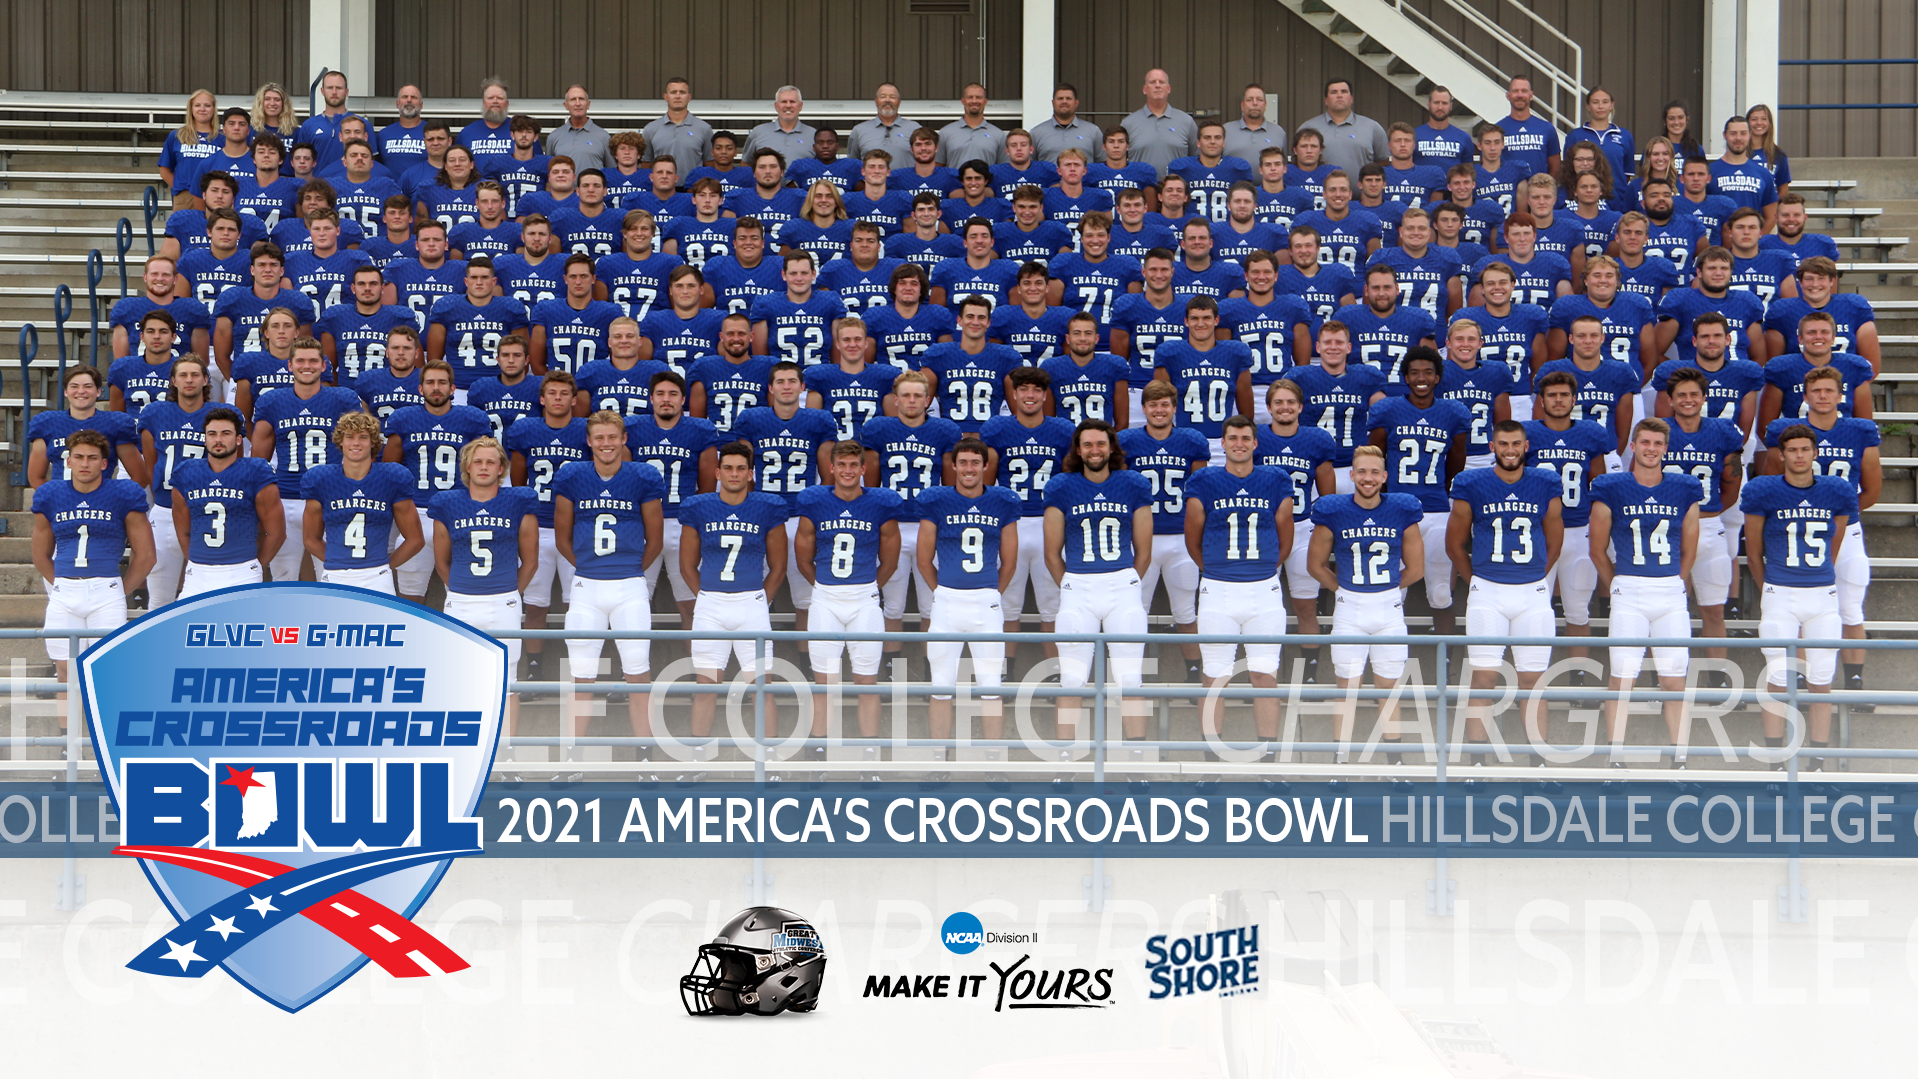 Preview: Chargers aim for redemption against Truman St. in America's Crossroads Bowl